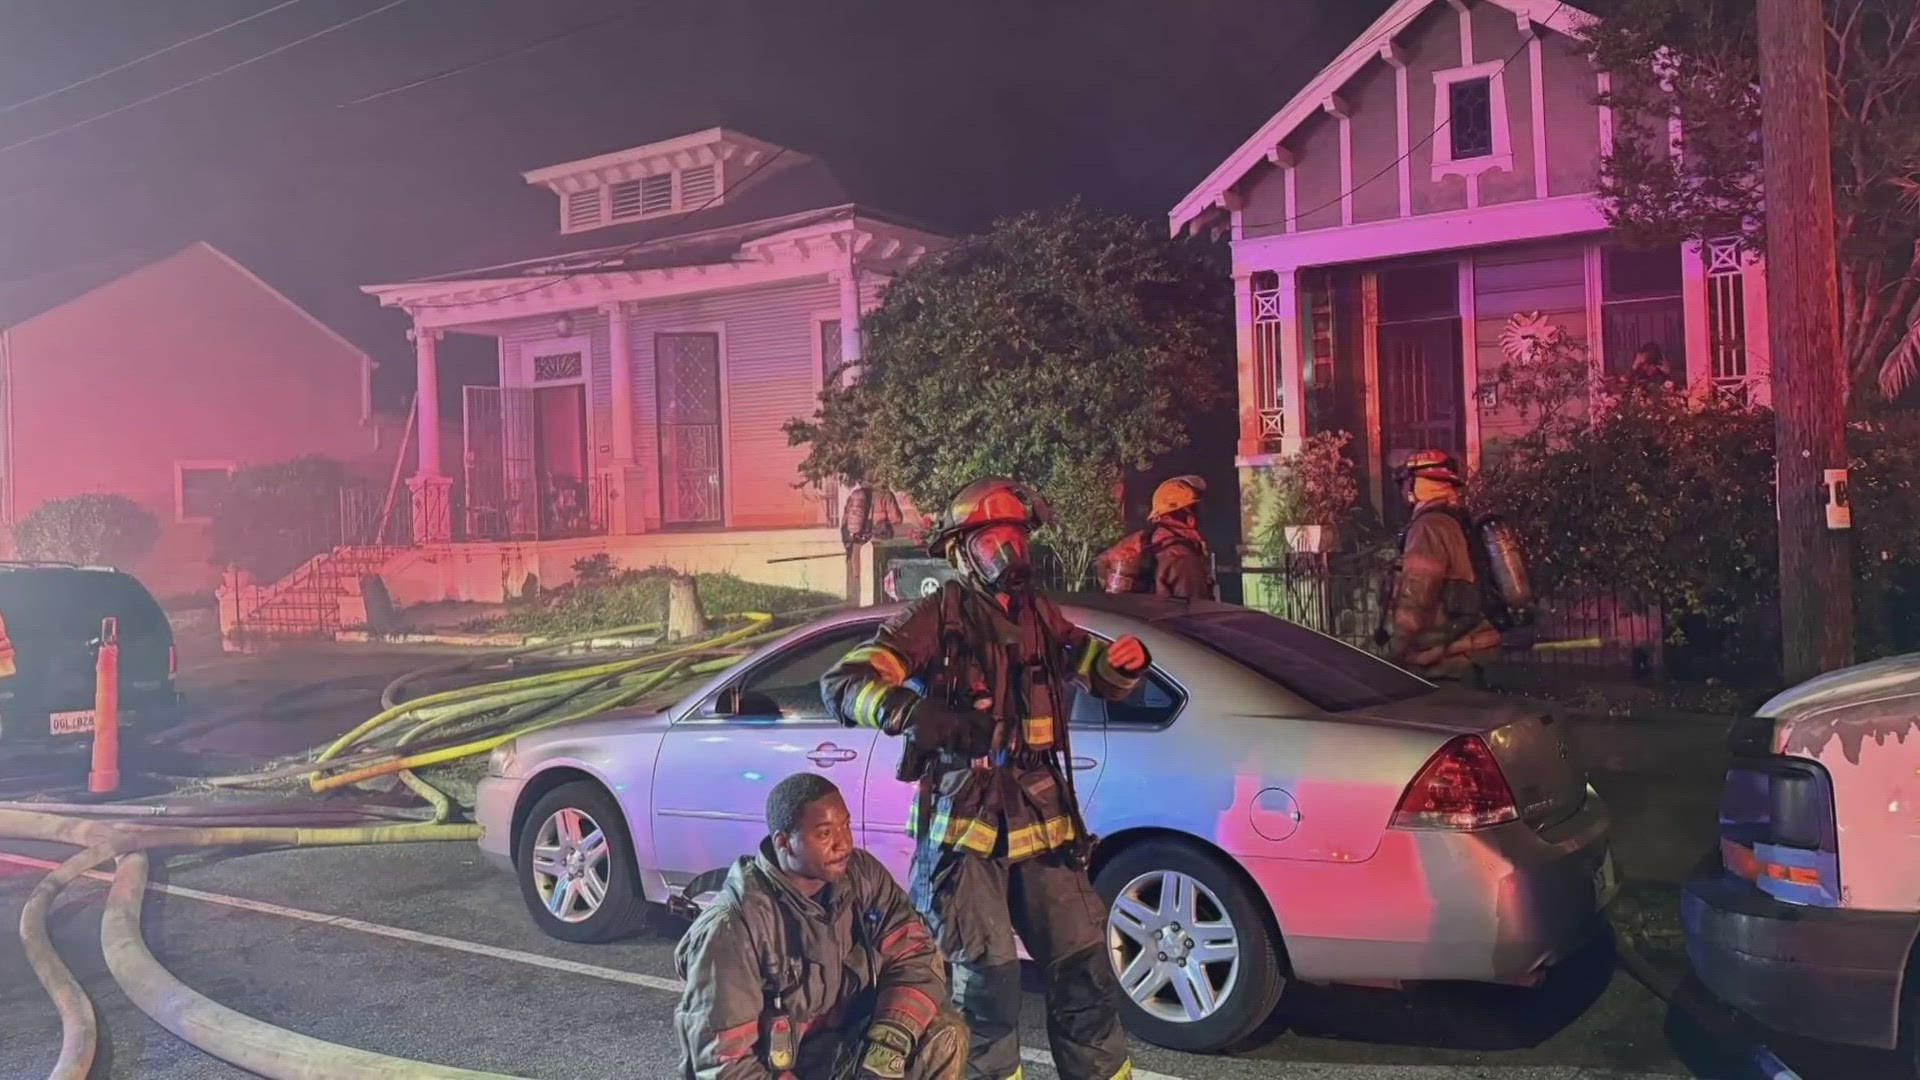 Three people are displaced after a 2-alarm fire damaged their New Orleans home.